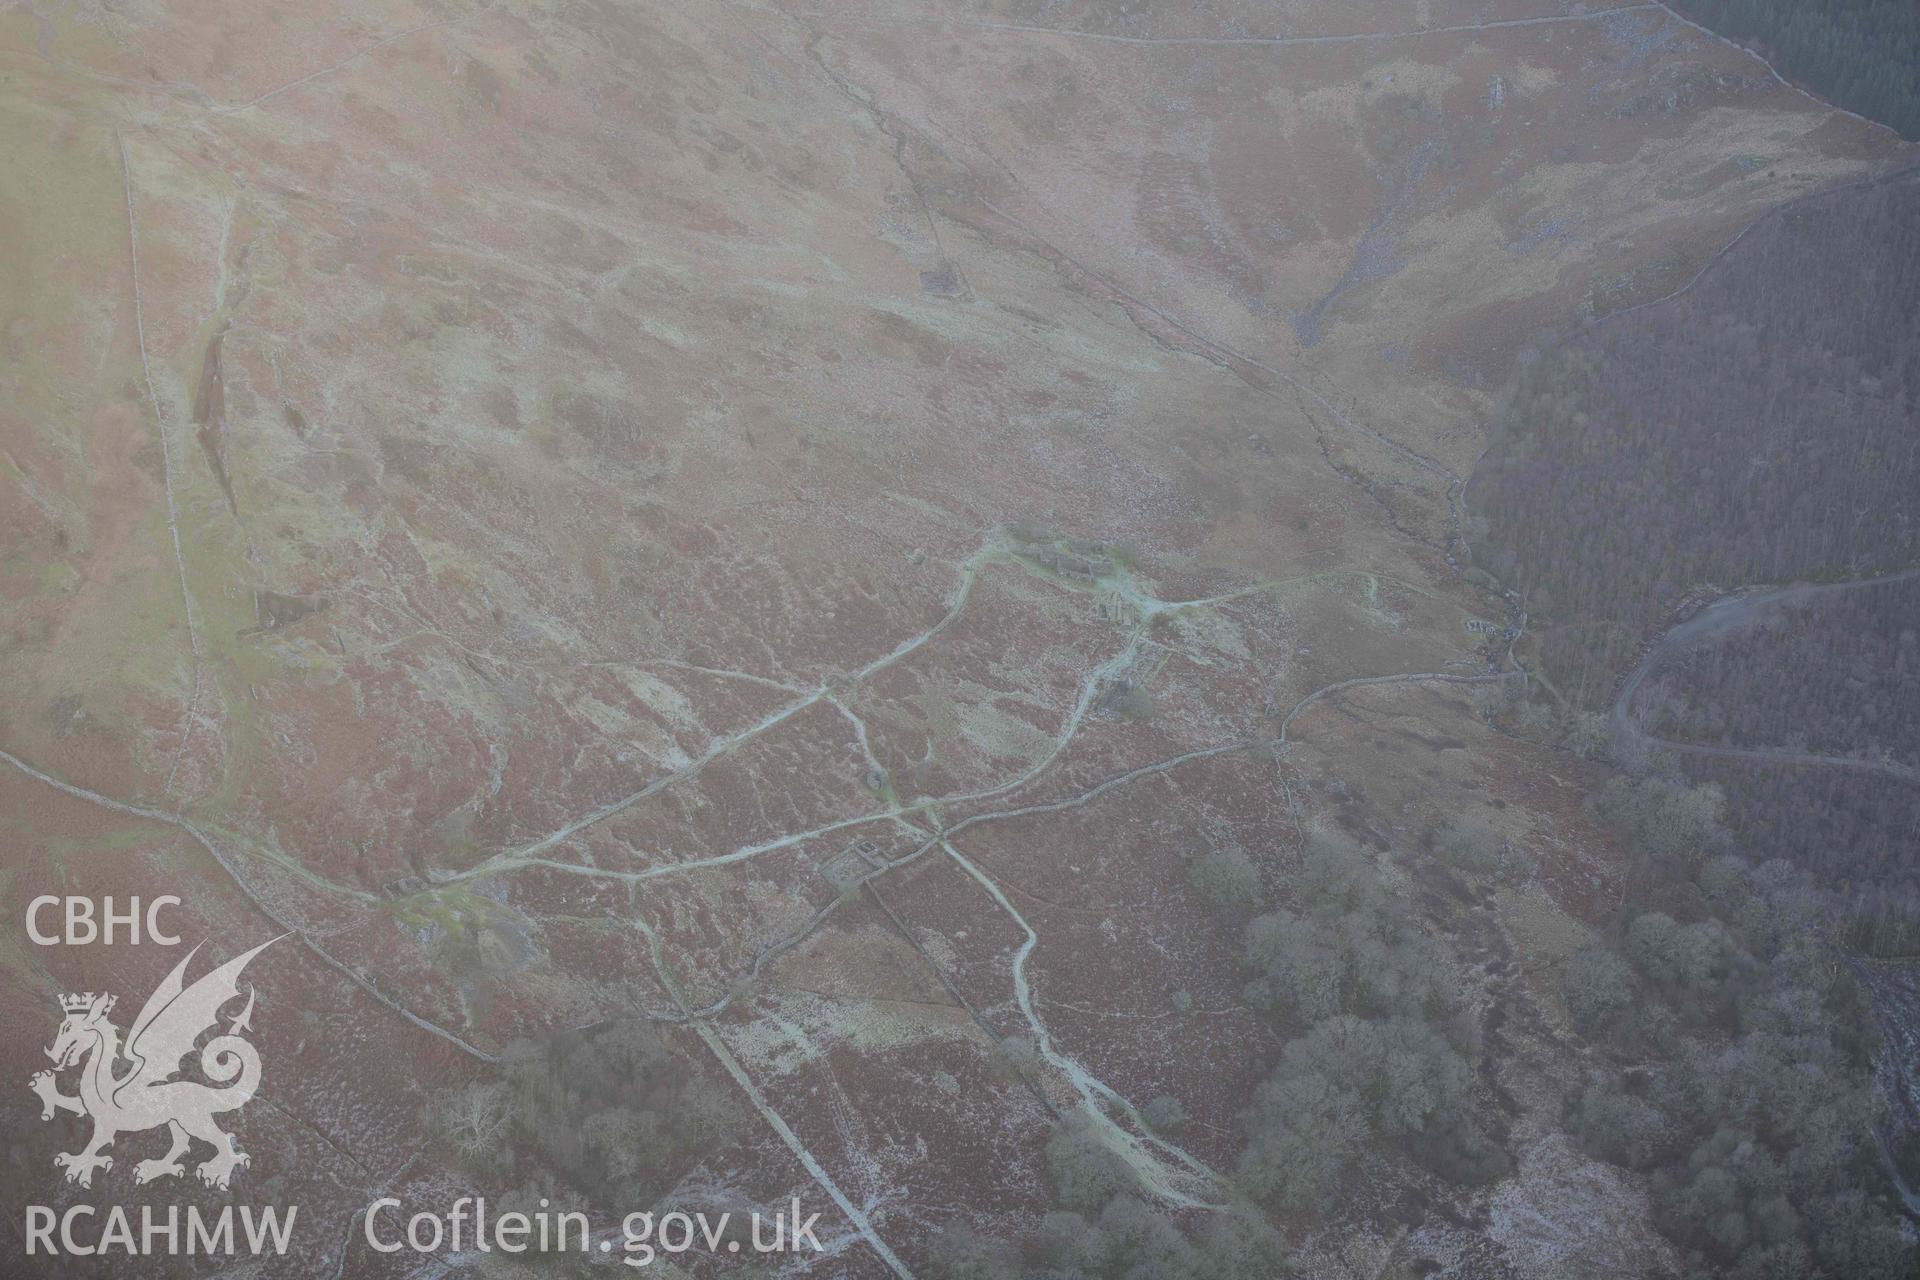 Oblique aerial photograph of Cefn Coch gold mine from the south east. Taken during the Royal Commission’s programme of archaeological aerial reconnaissance by Toby Driver on 17th January 2022